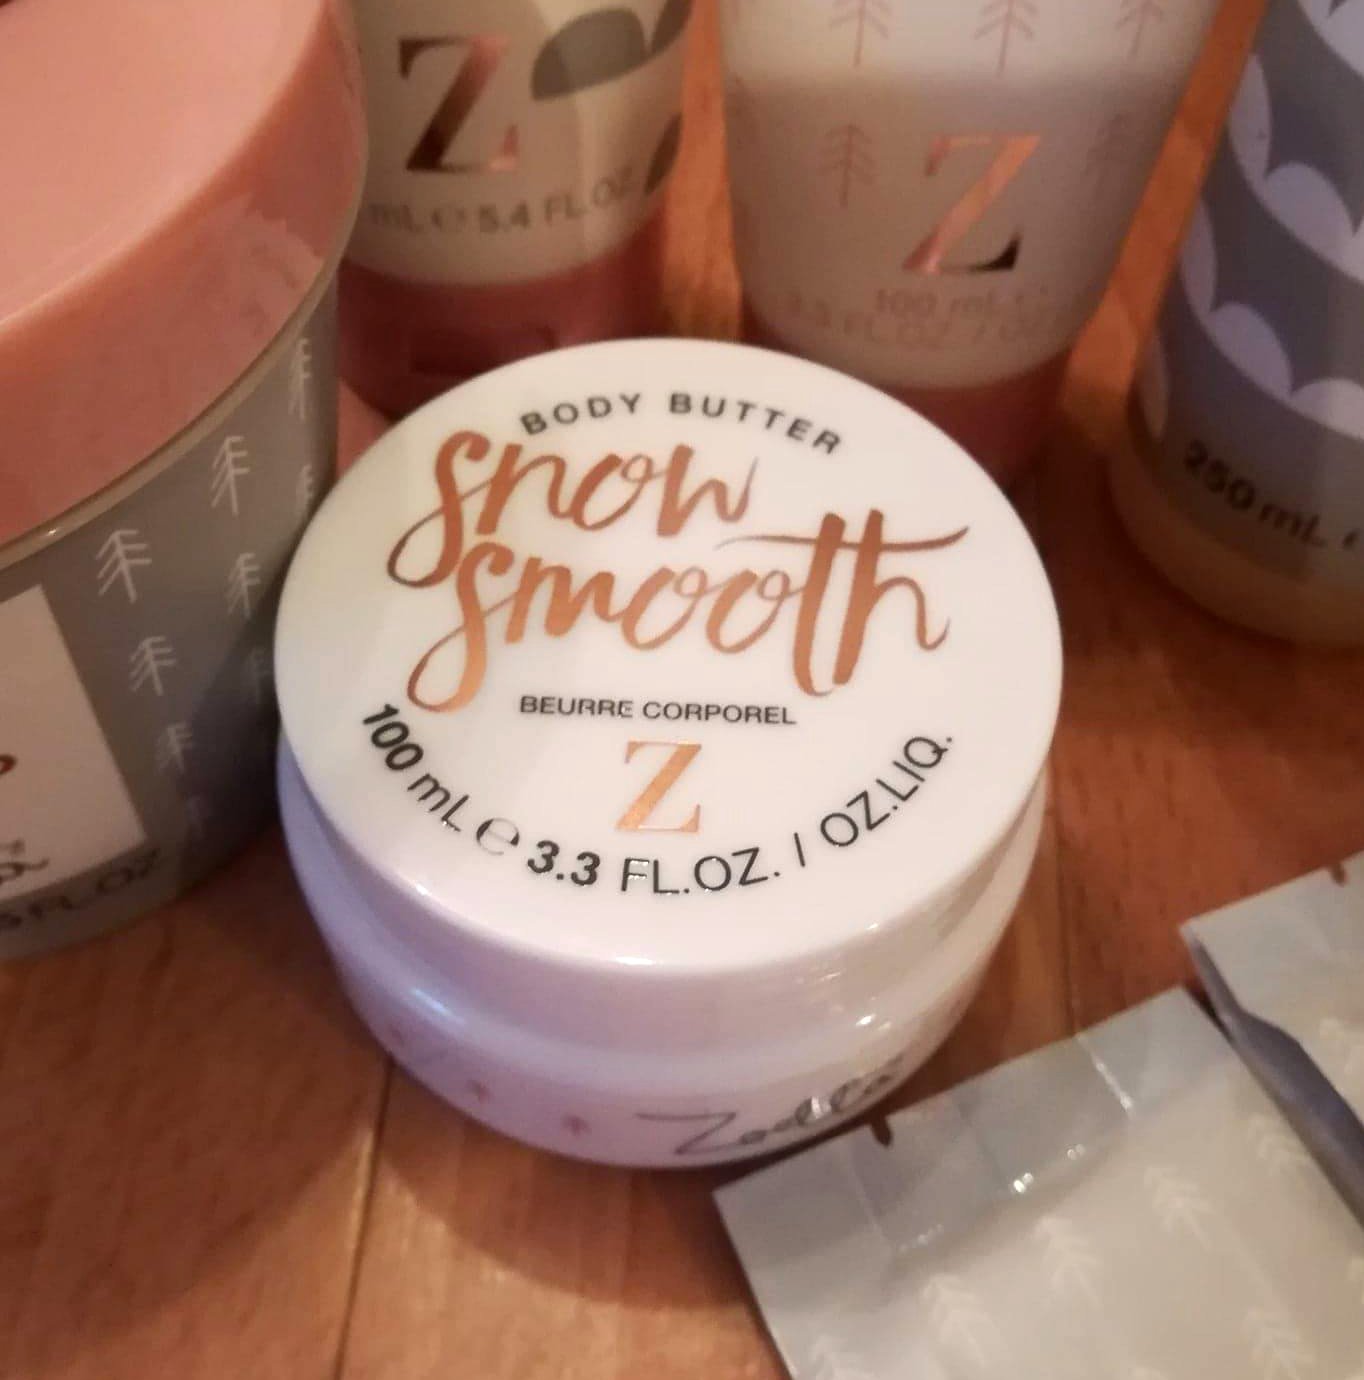 Should You Buy Zoella Beauty Products